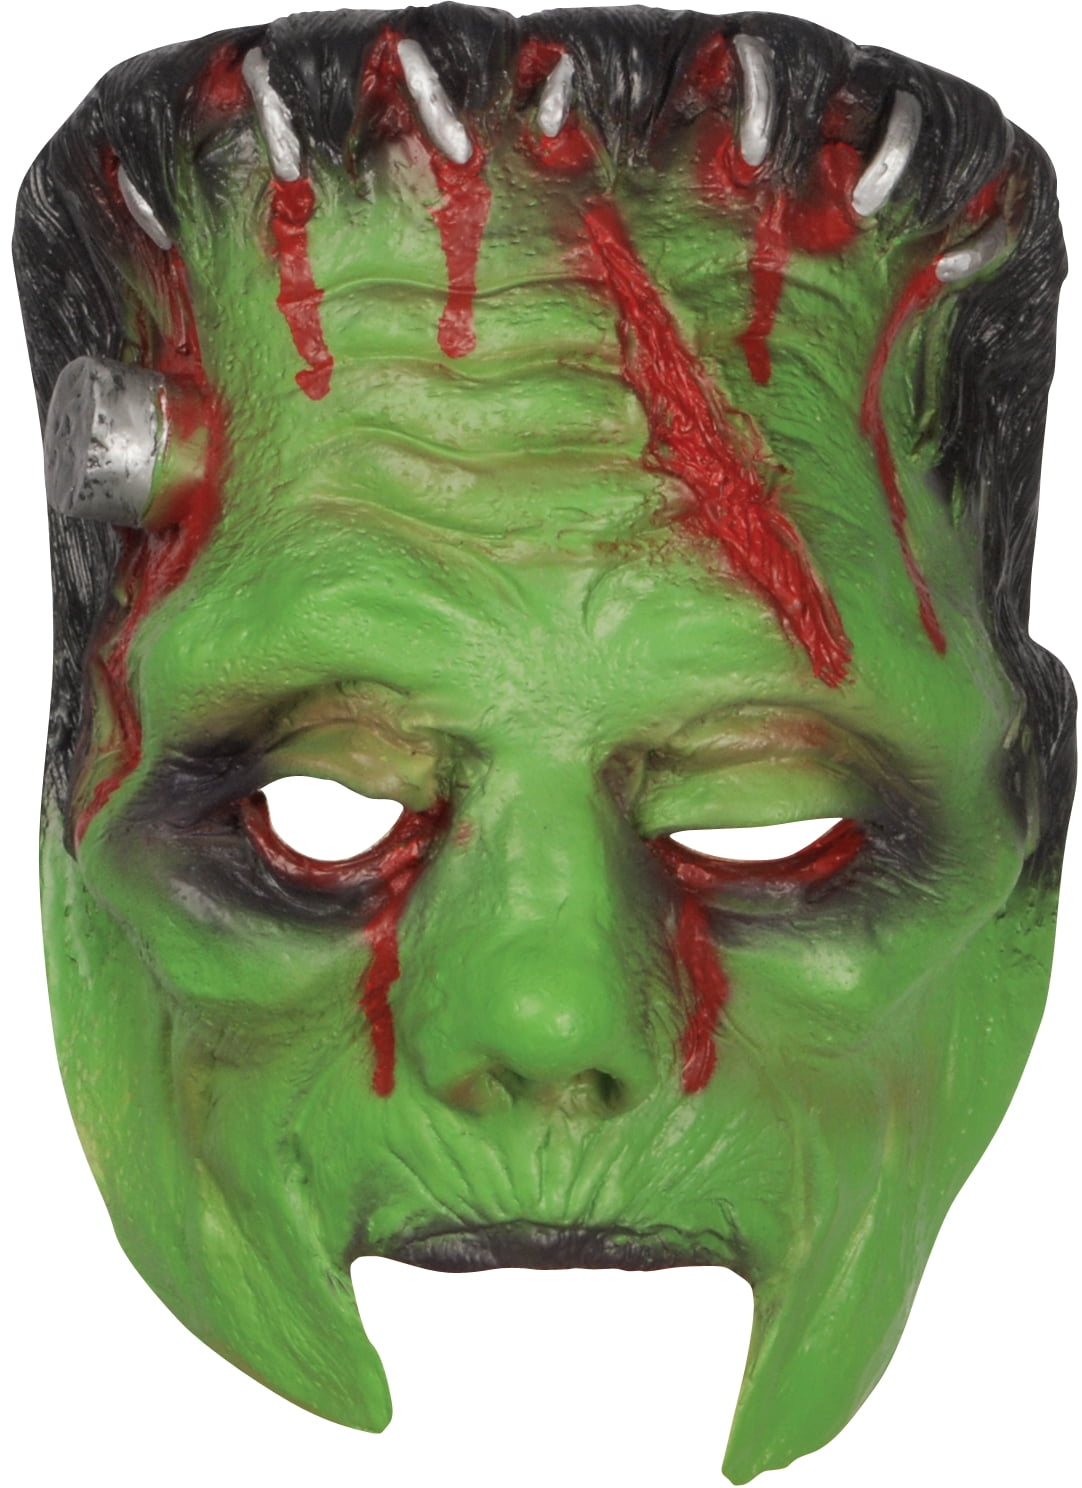 Frankenstein Mask Halloween Latex Scary Horror Mask Costume Party Masks Props 